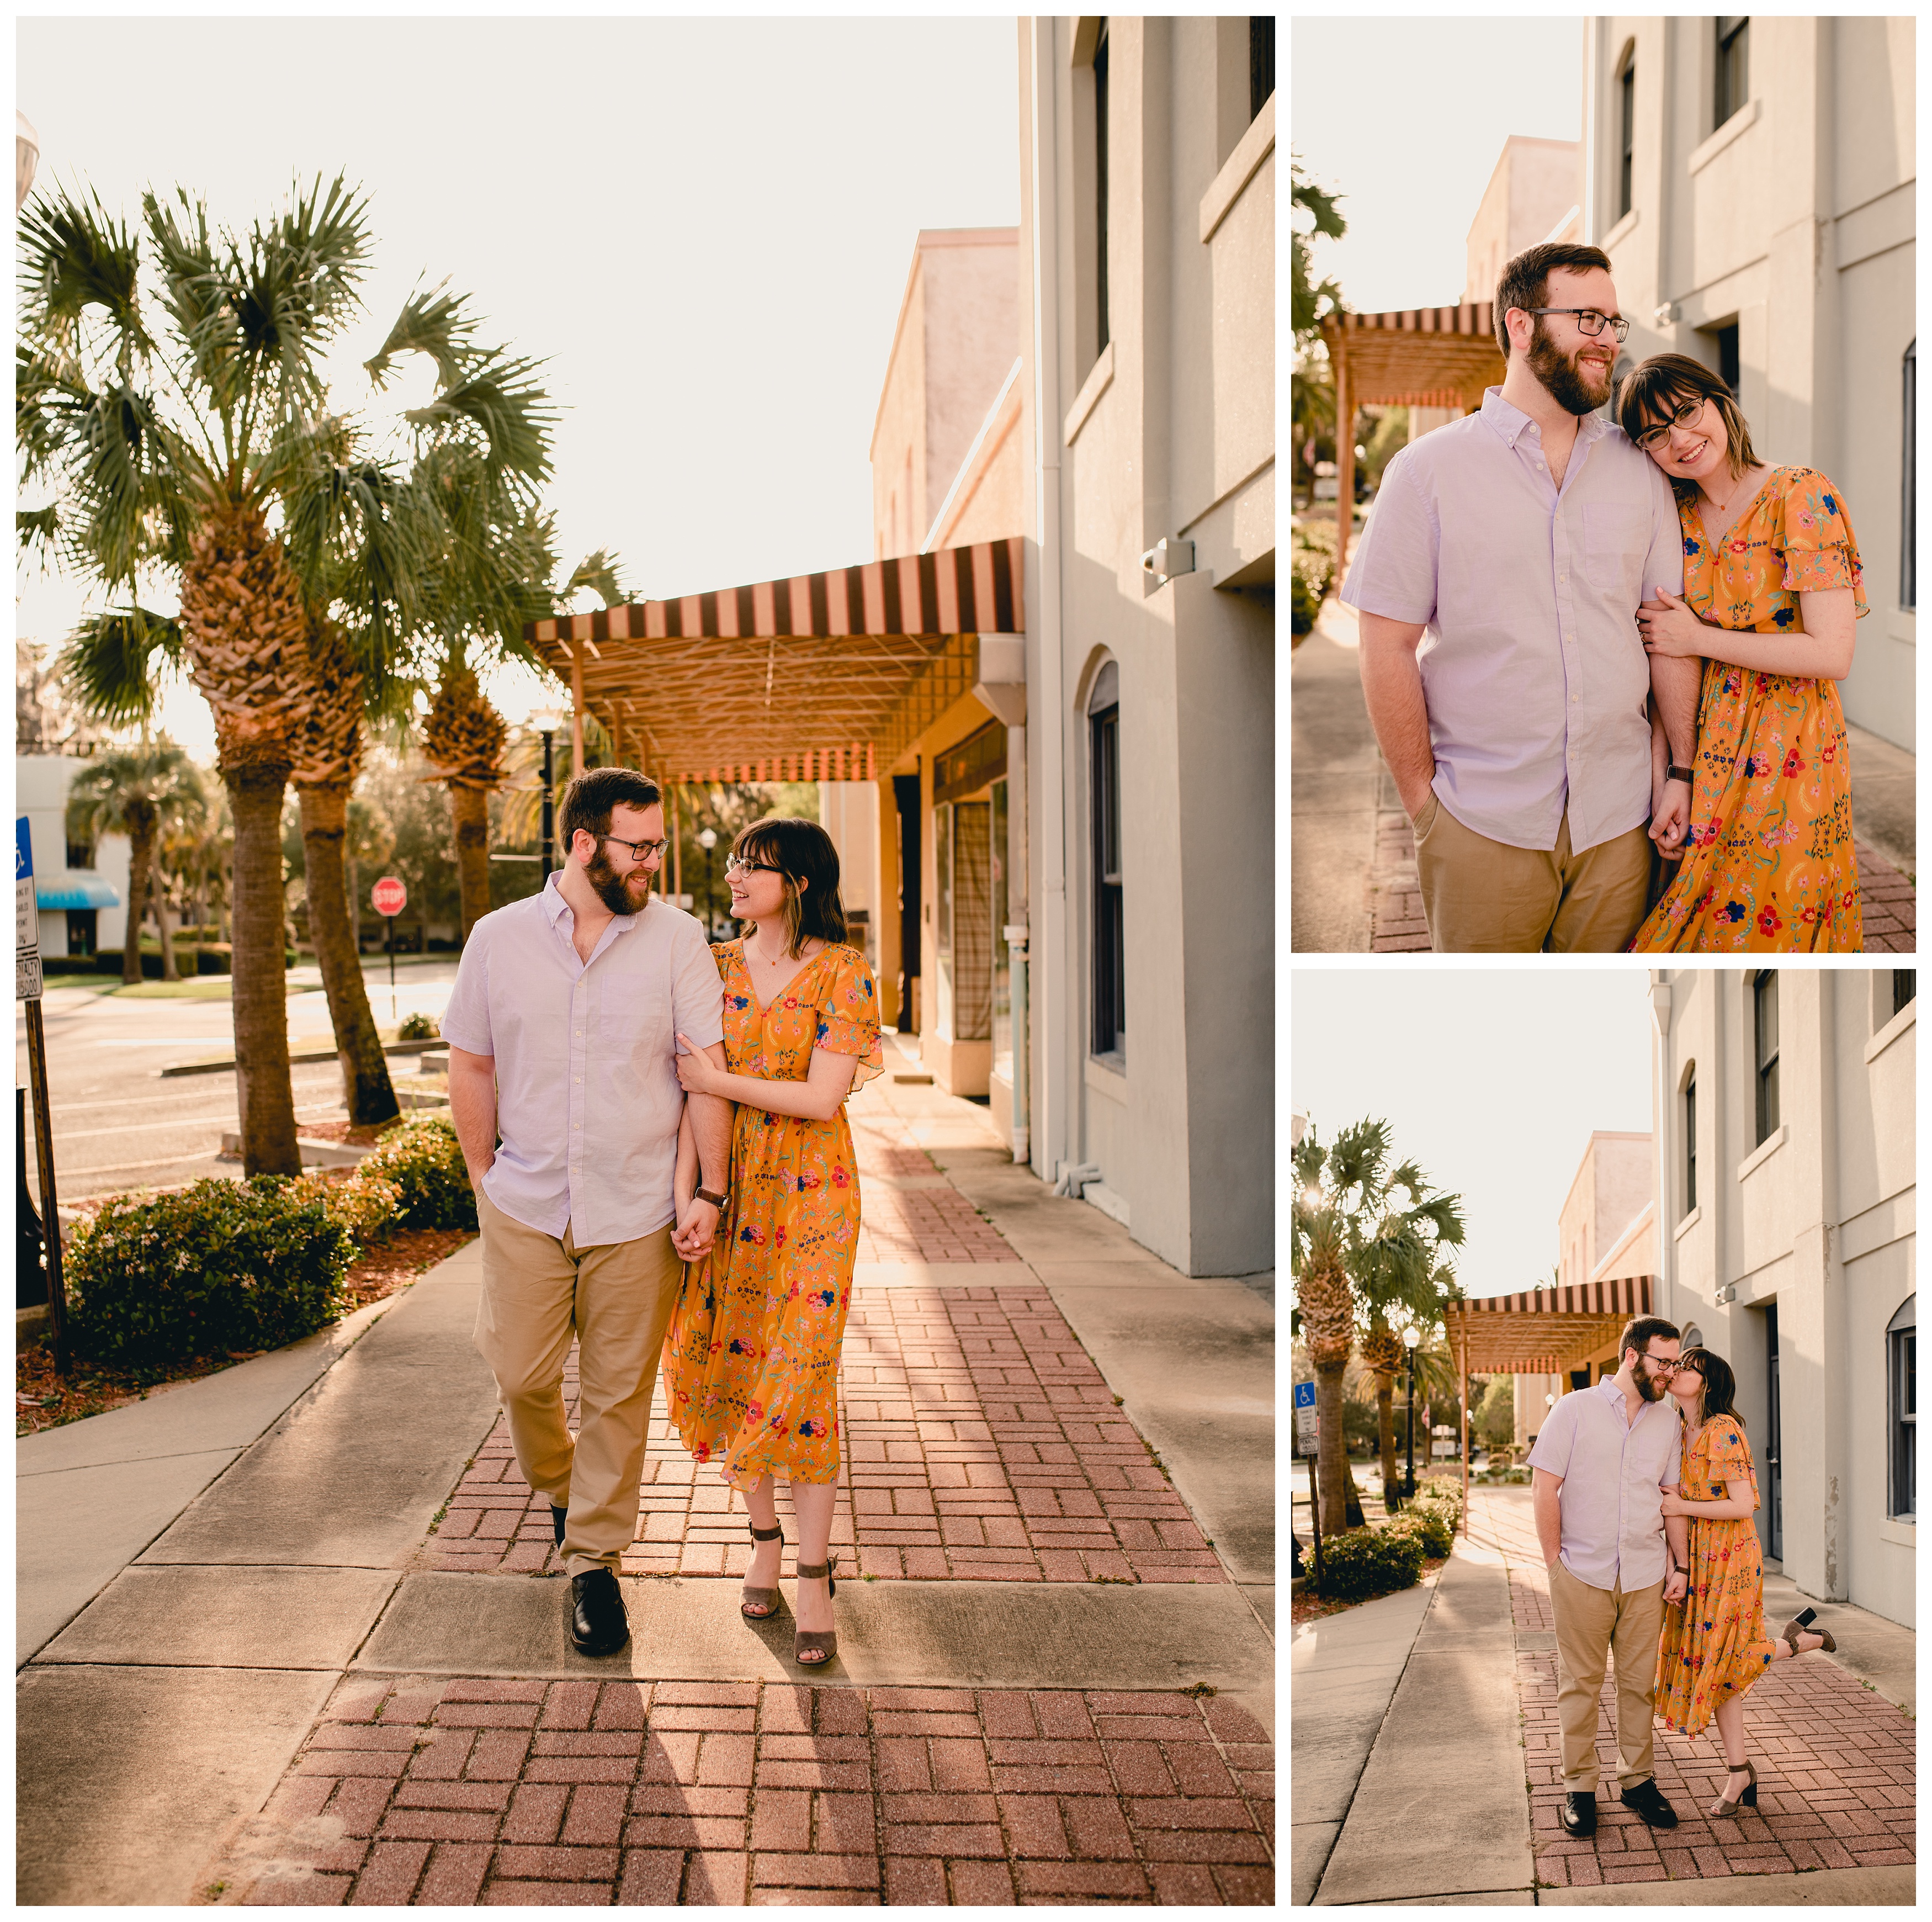 Lifestyle tallahassee engagement photographer capturing fun moments. Shelly Williams Photography